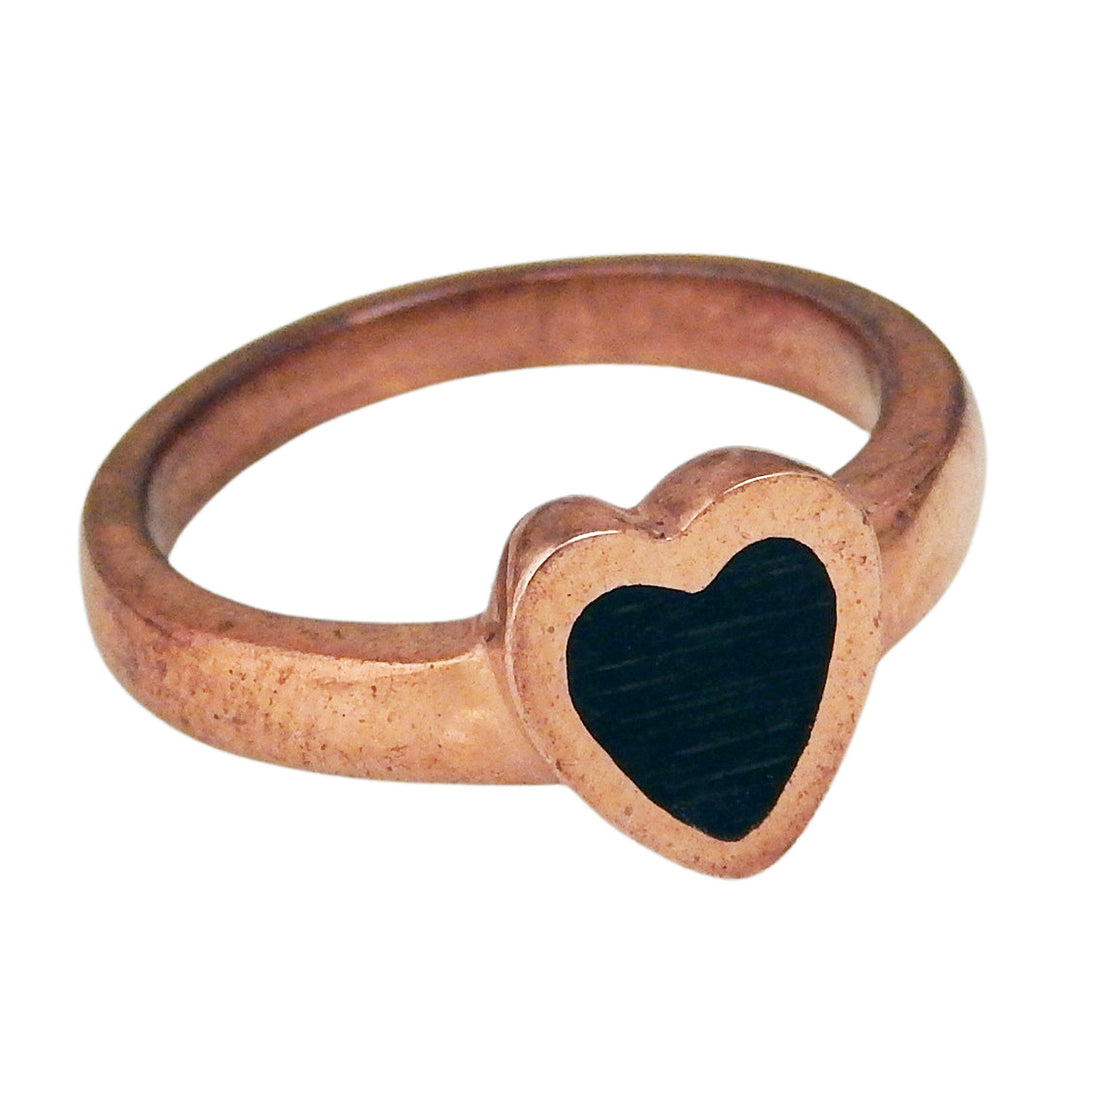 MARCOS - "TINY HEART RING" in Copper with EBONY Wood Inlay